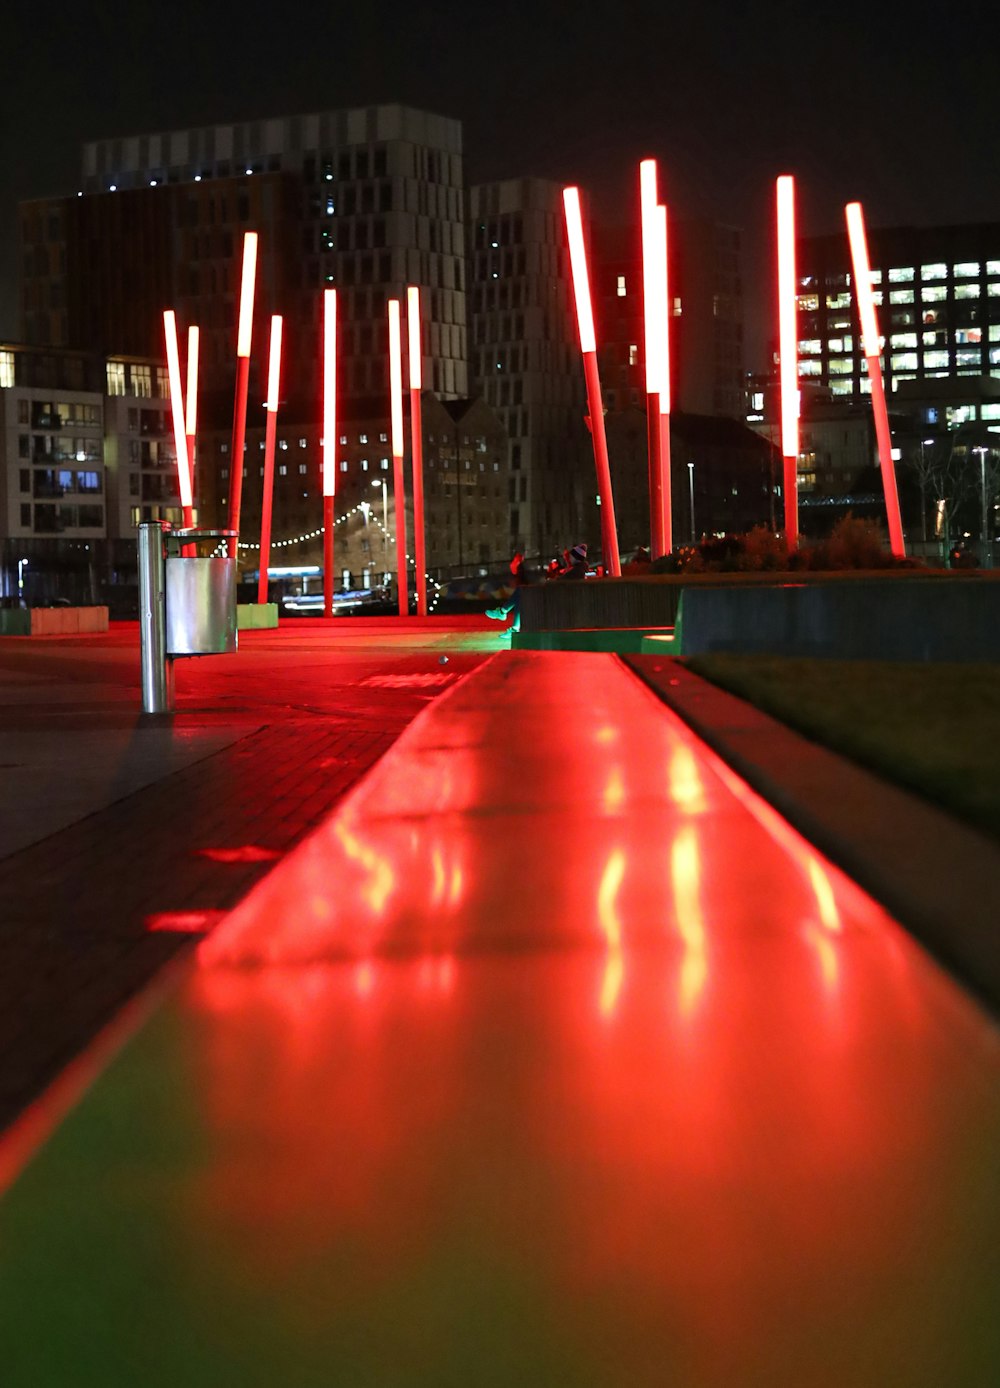 a red walkway in a city at night